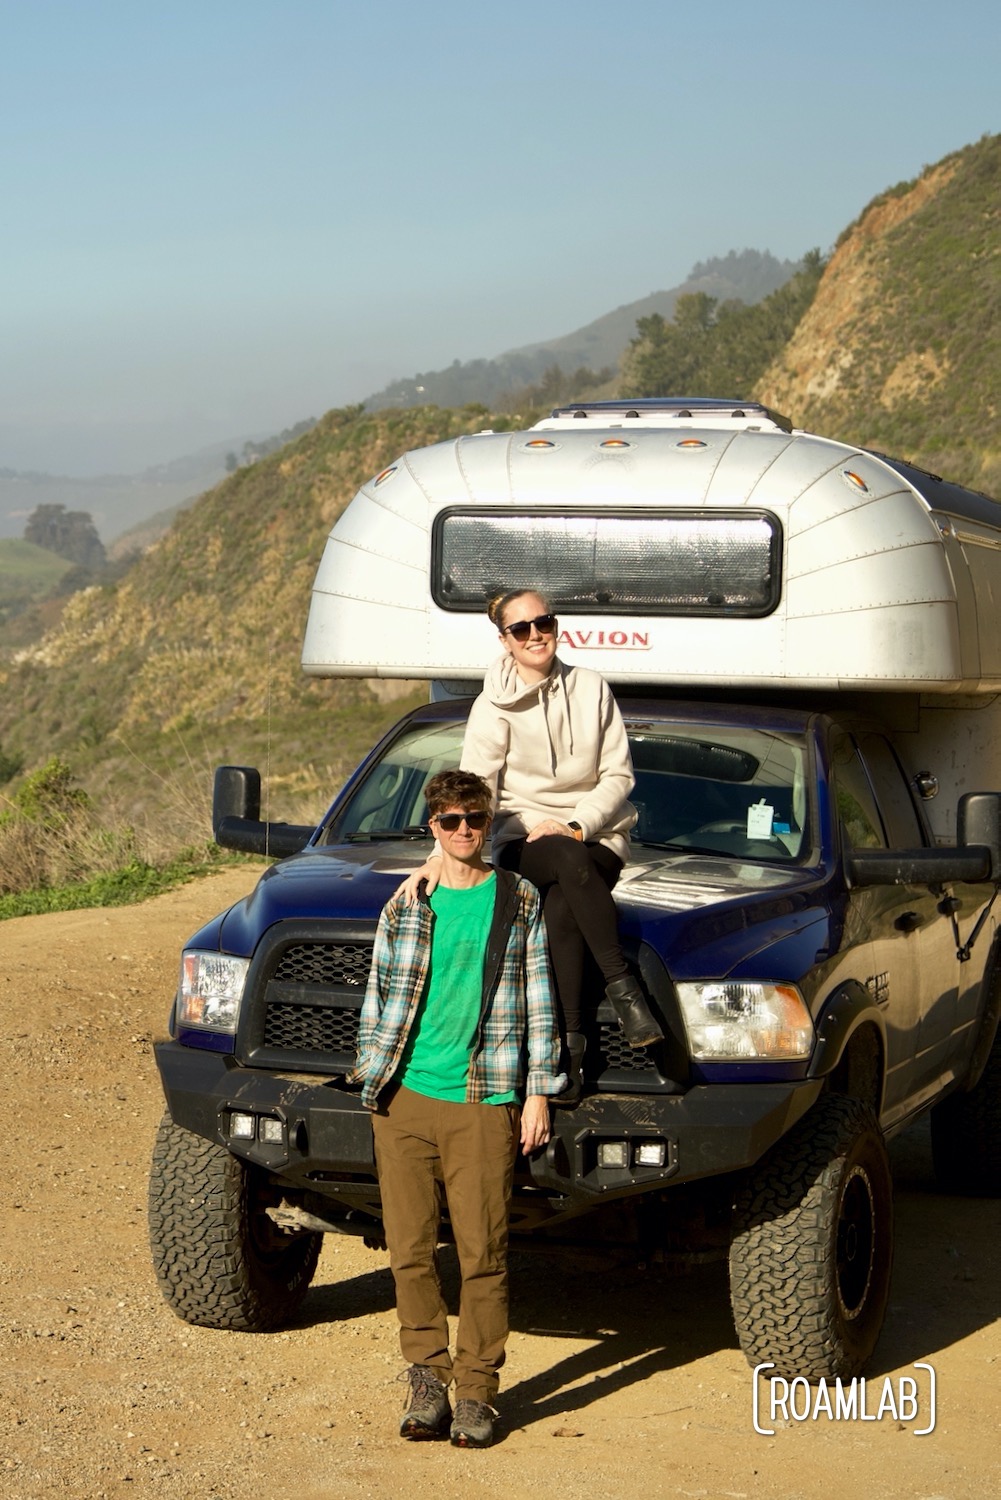 Lexi and Chris from Roam Lab, sitting on their 1970 Avion C11 truck camper on a pulloff off Highway 1 in Big Sur, California.